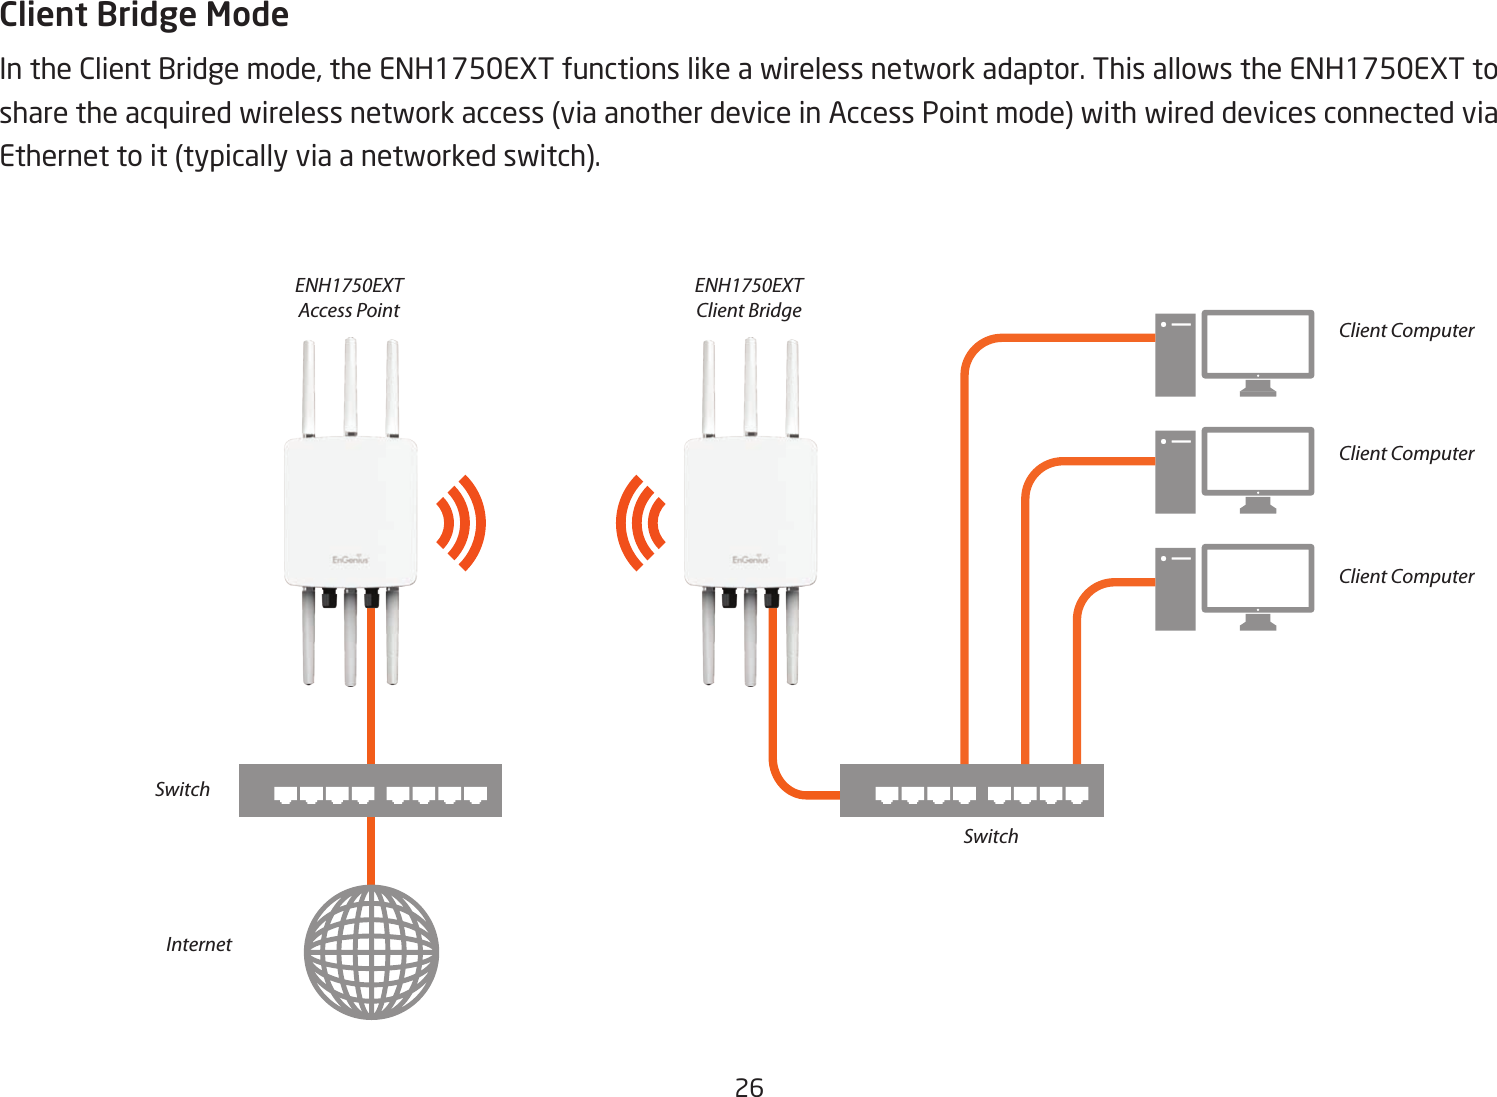 26Client Bridge ModeIn the Client Bridge mode, the ENH1750EXT functions like a wireless network adaptor. This allows the ENH1750EXT to share the acquired wireless network access (via another device in Access Point mode) with wired devices connected via Ethernet to it (typically via a networked switch).ENH1750EXTAccess PointSwitchSwitchClient ComputerClient ComputerClient ComputerInternetENH1750EXTClient Bridge